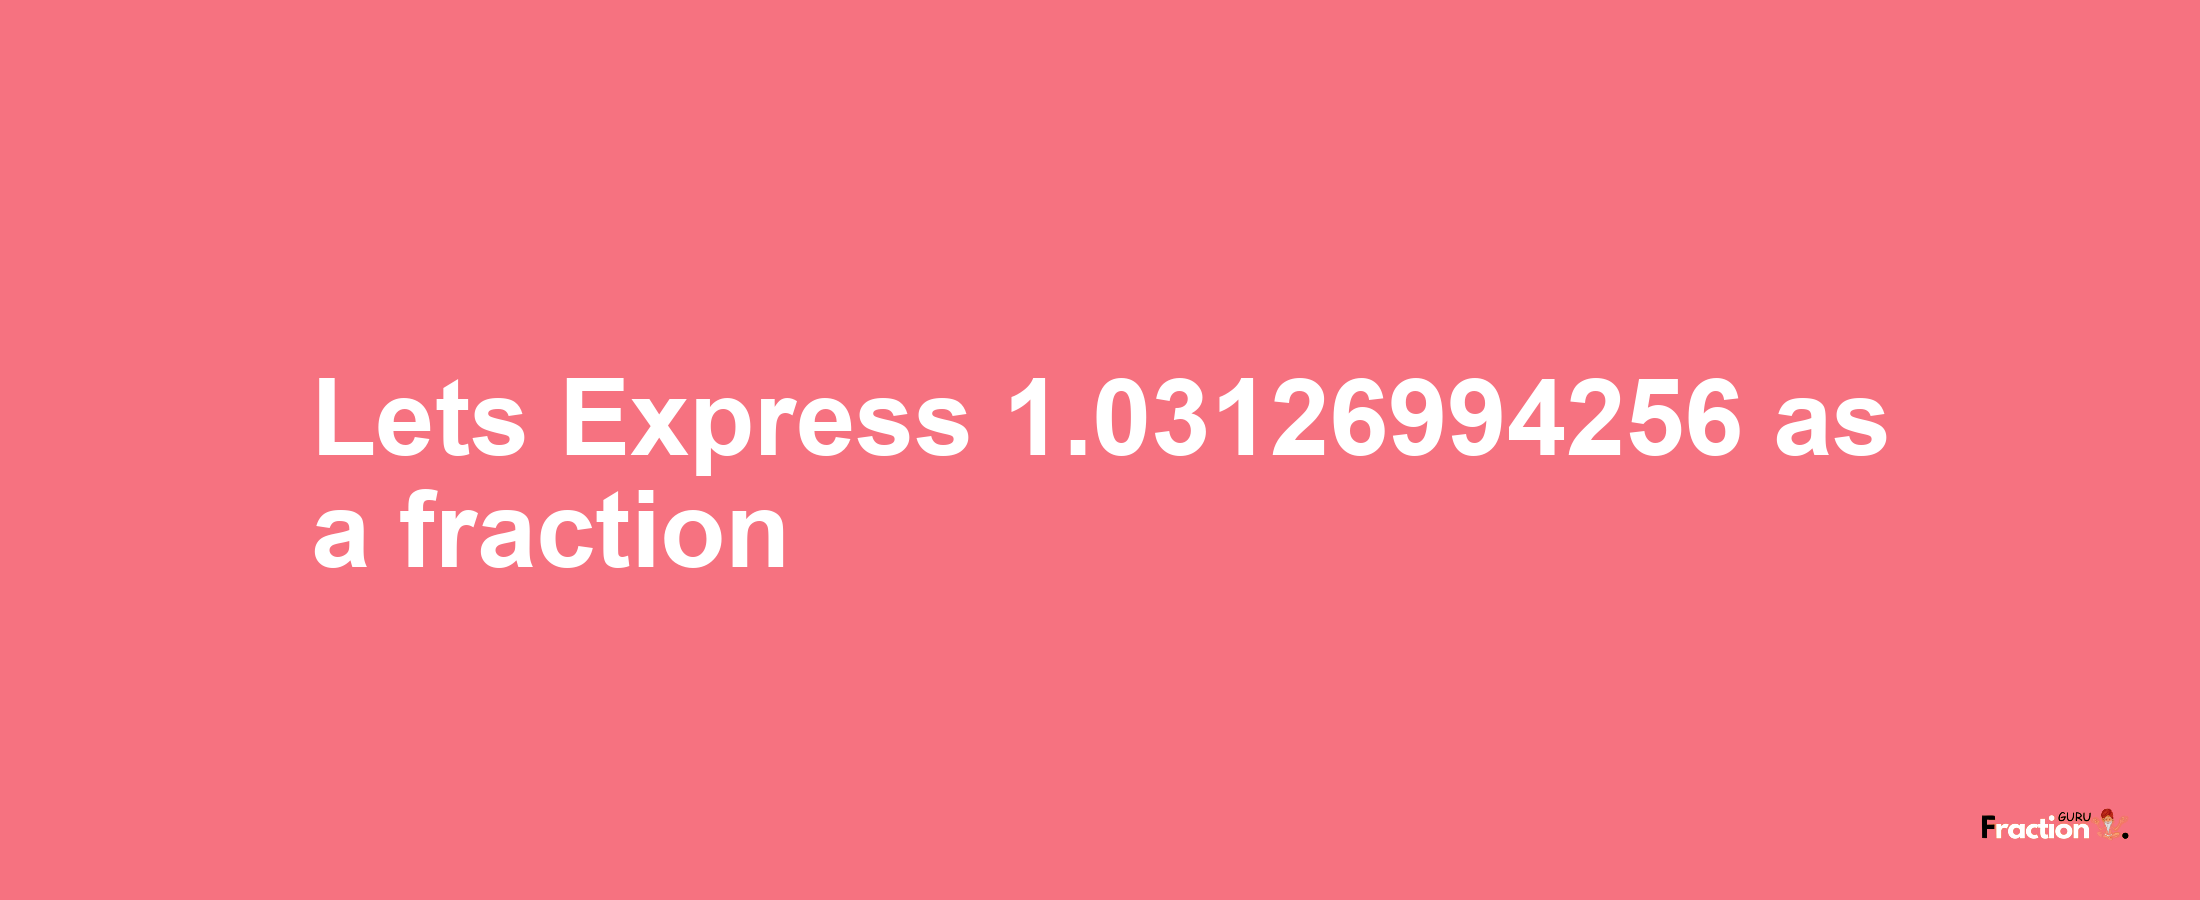 Lets Express 1.03126994256 as afraction